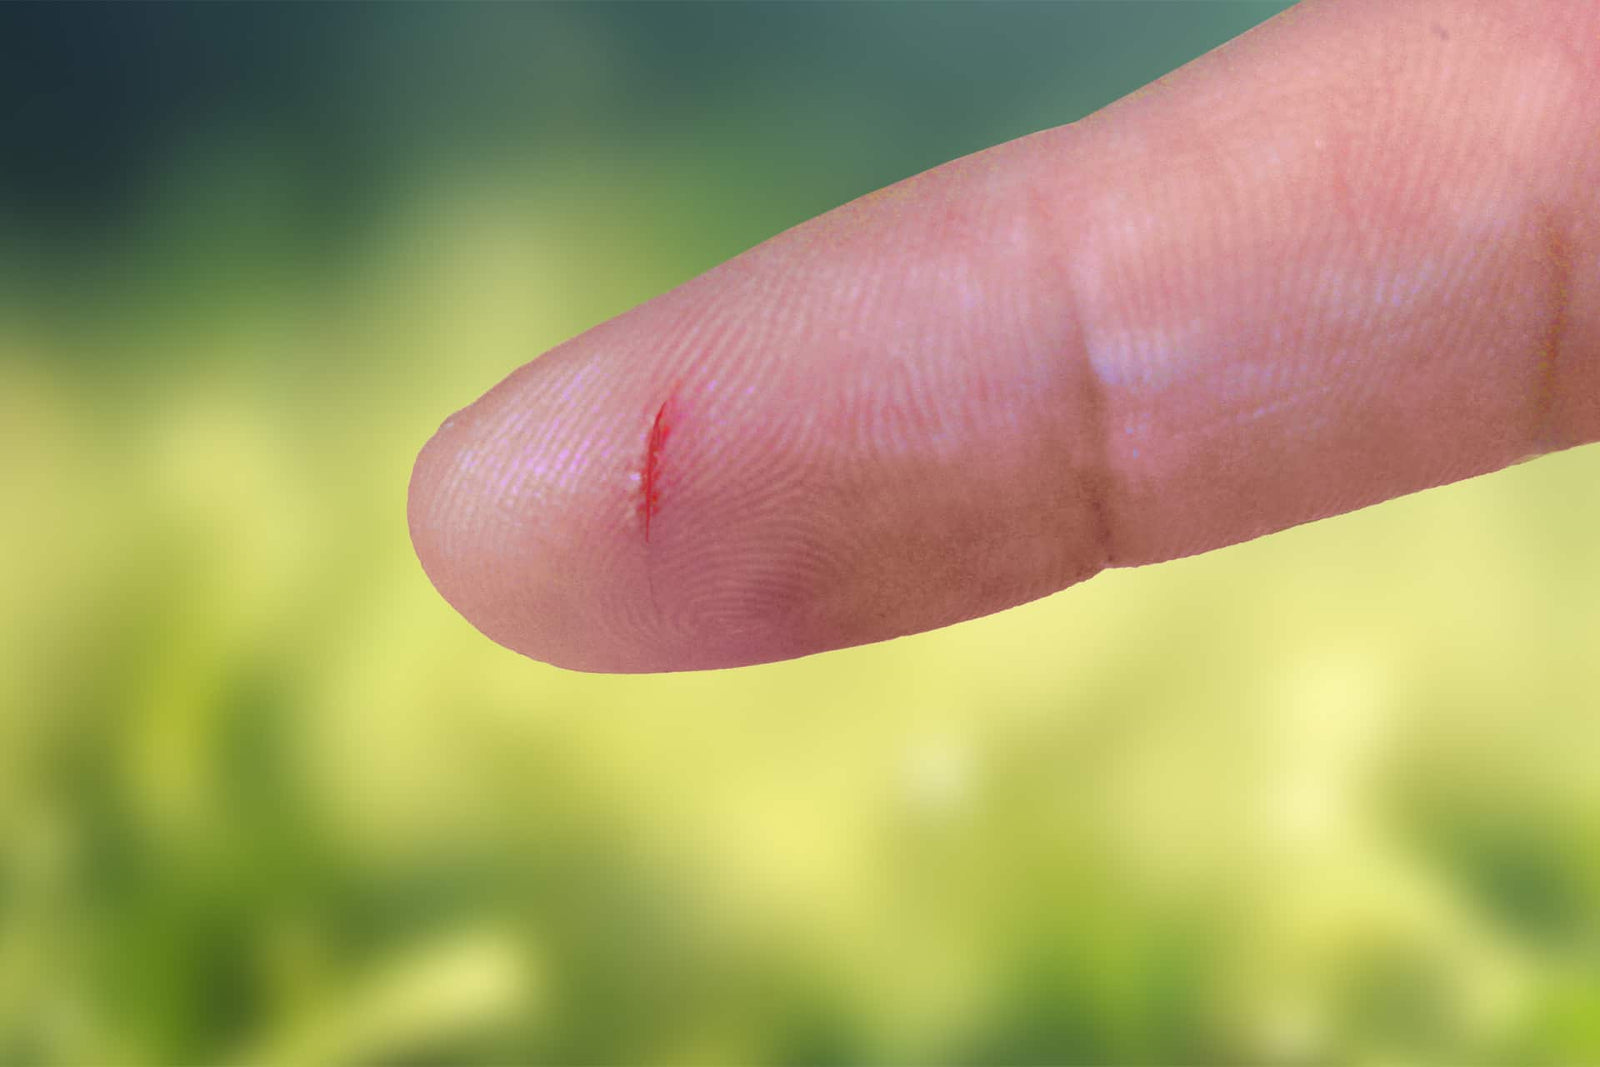 STOP Using Super Glue on Your Cuts and Cracked Skin! - Cloud 9